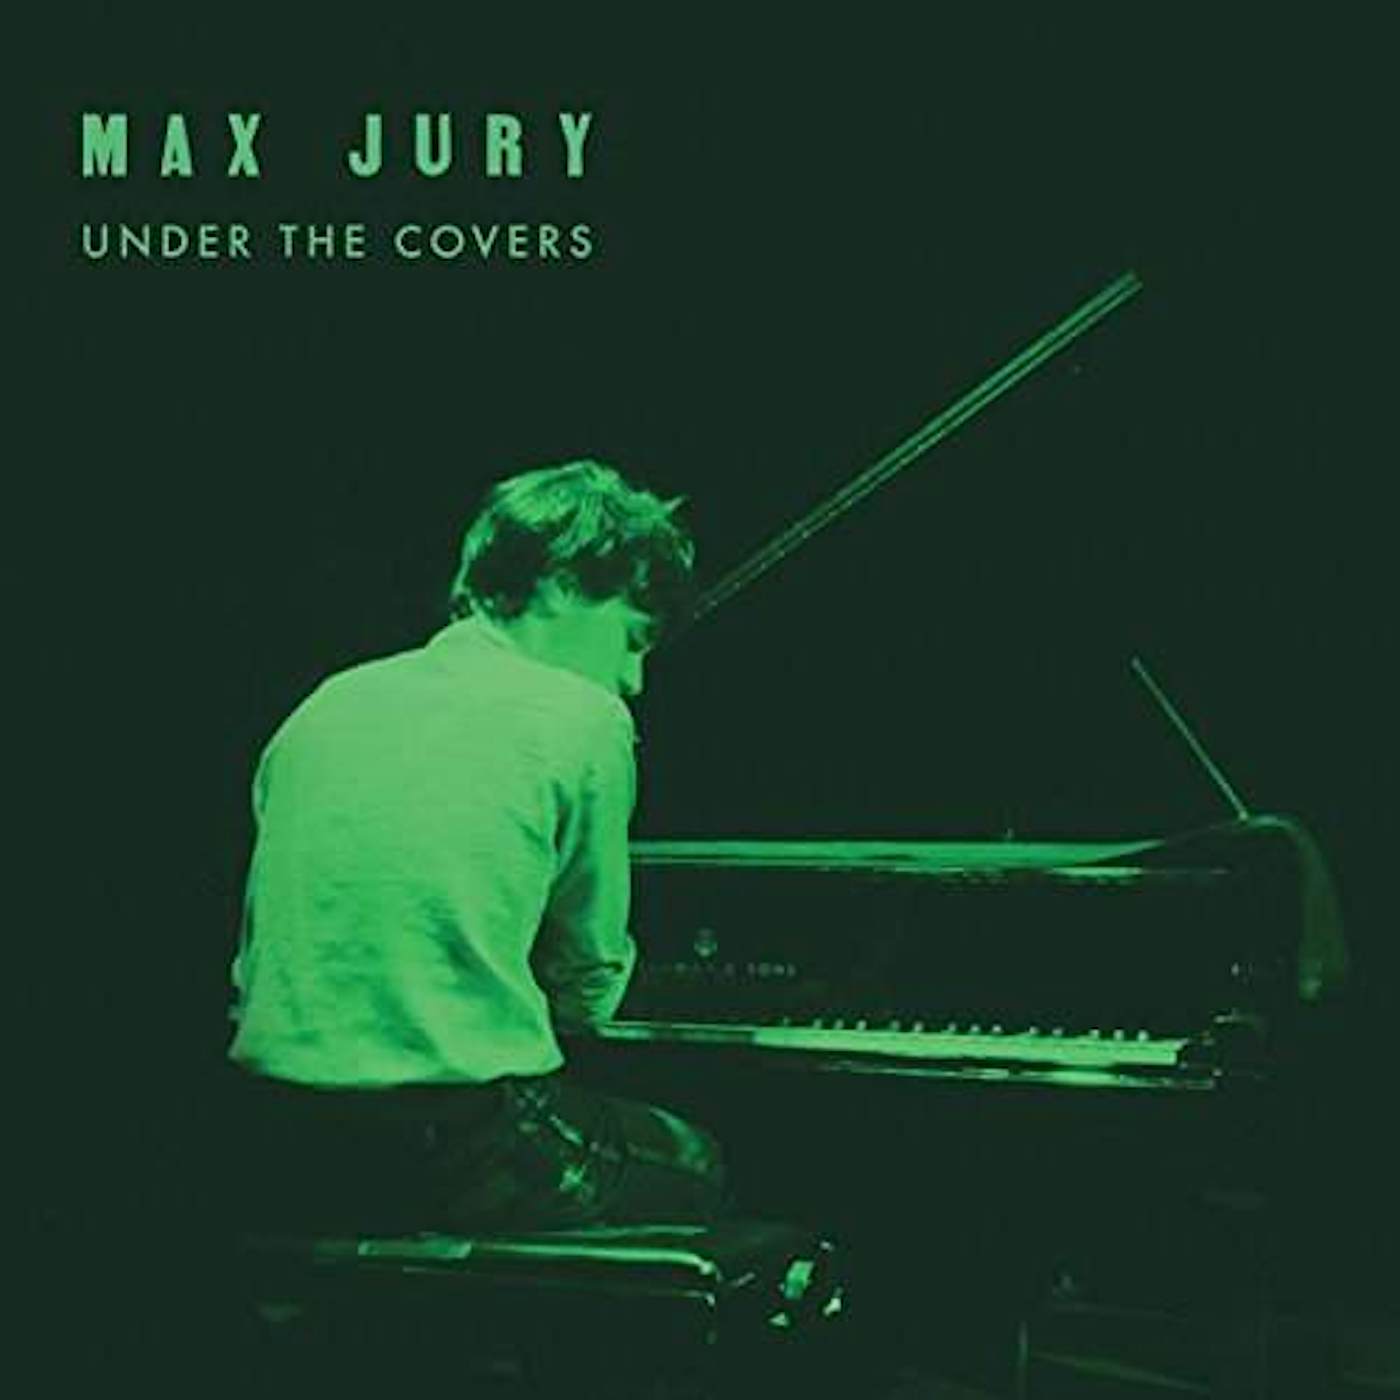 Max Jury UNDER THE COVERS Vinyl Record